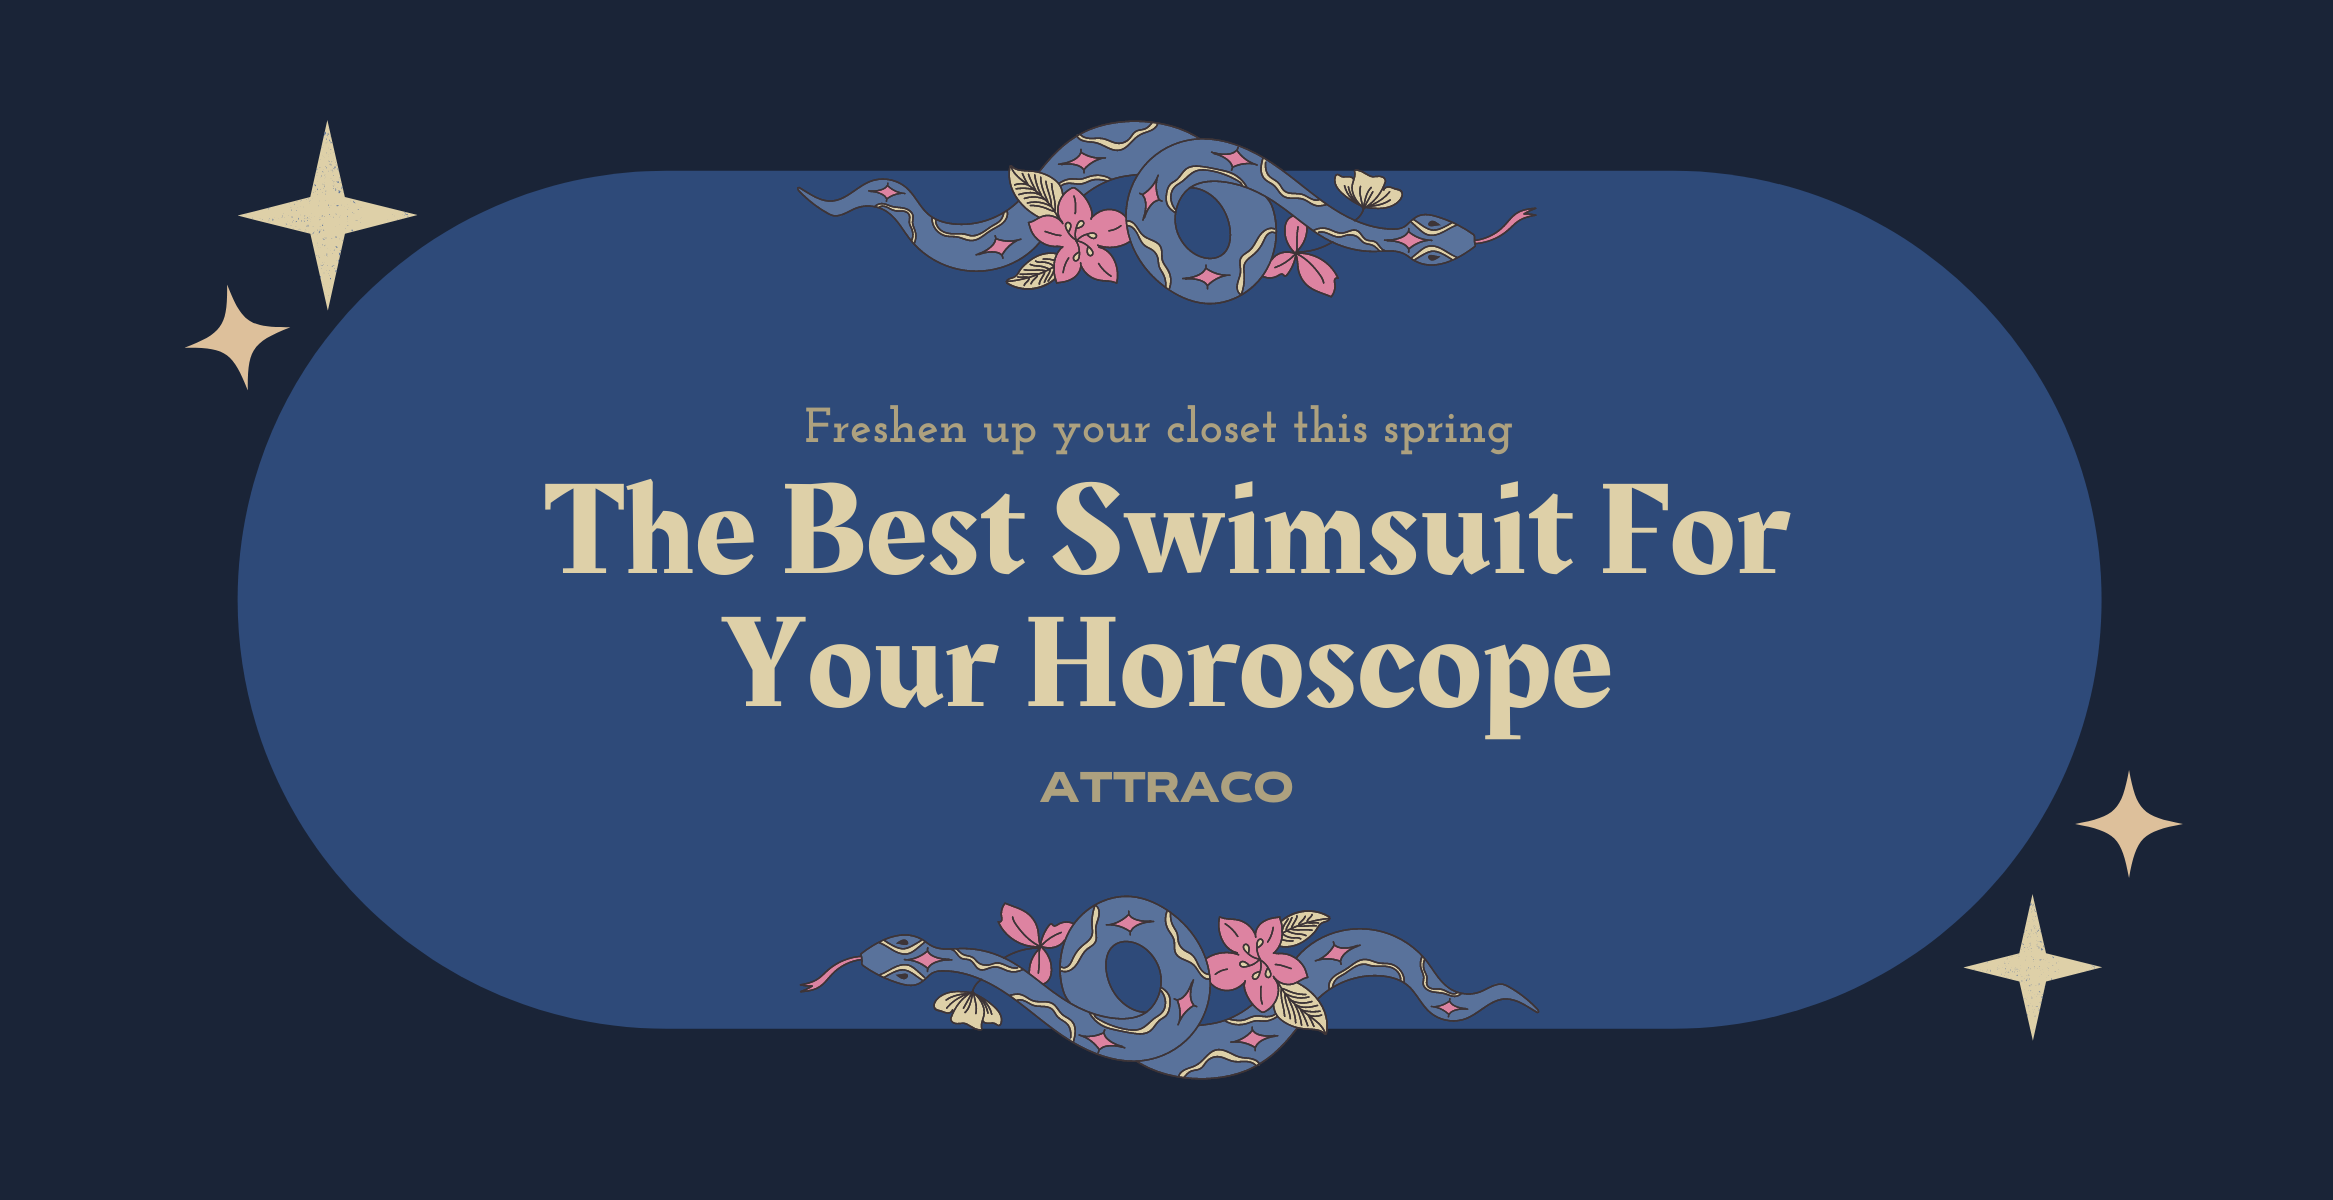 The Best Swimsuit For Your Horoscope